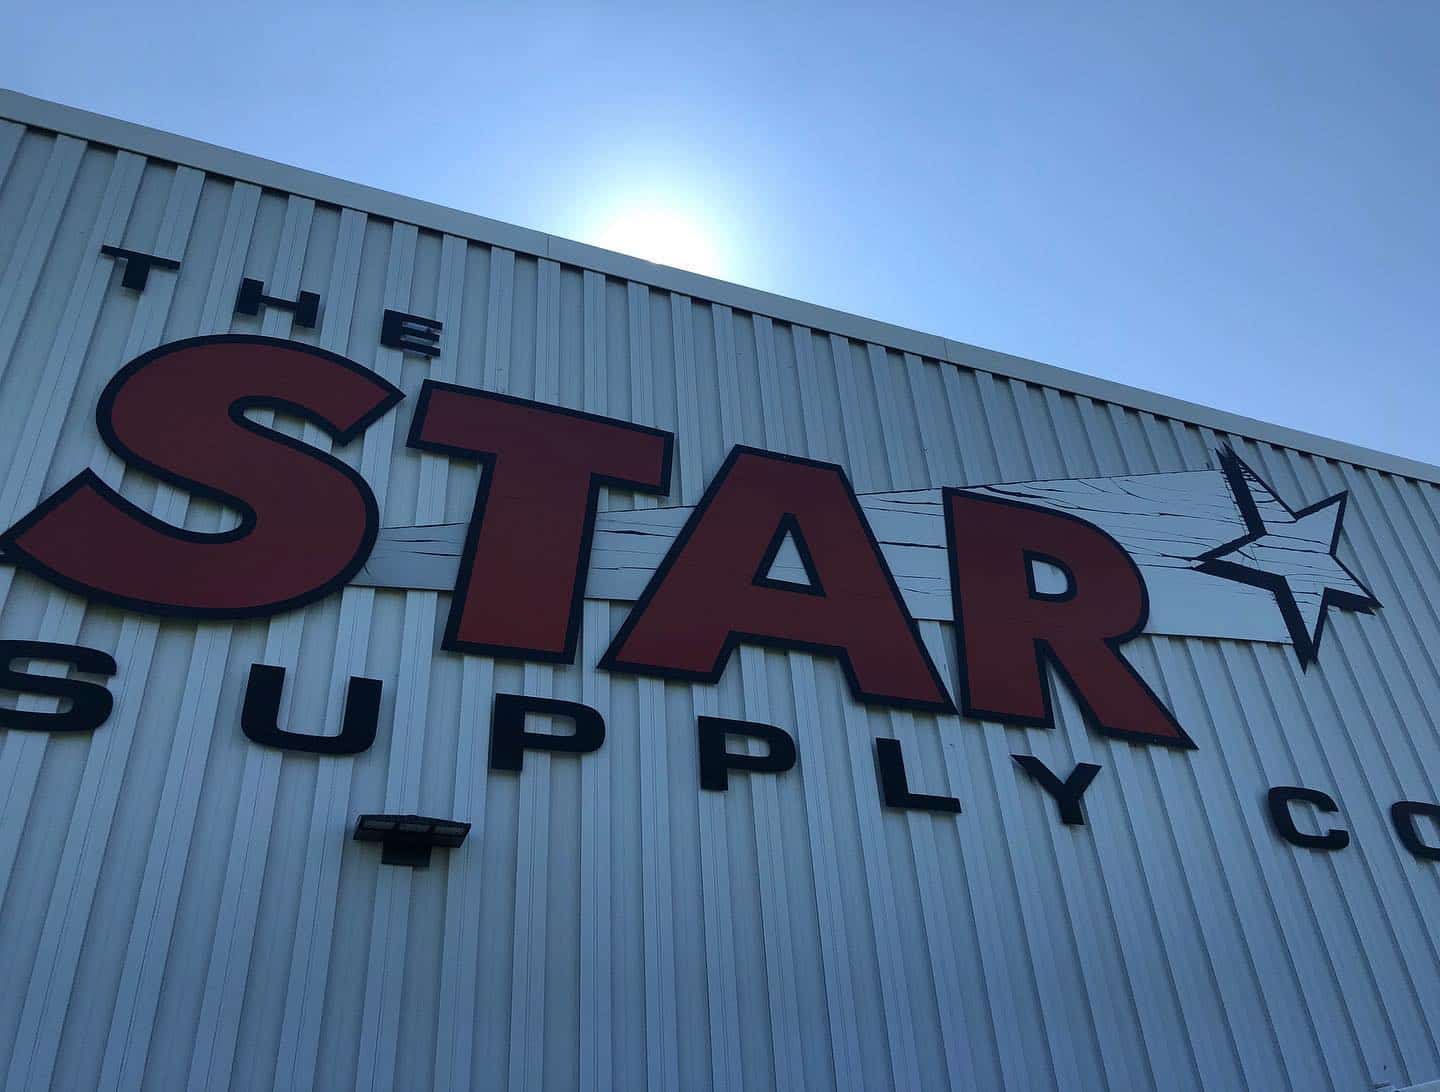 The Star Supply Co Signmakover New Haven, Connecticut